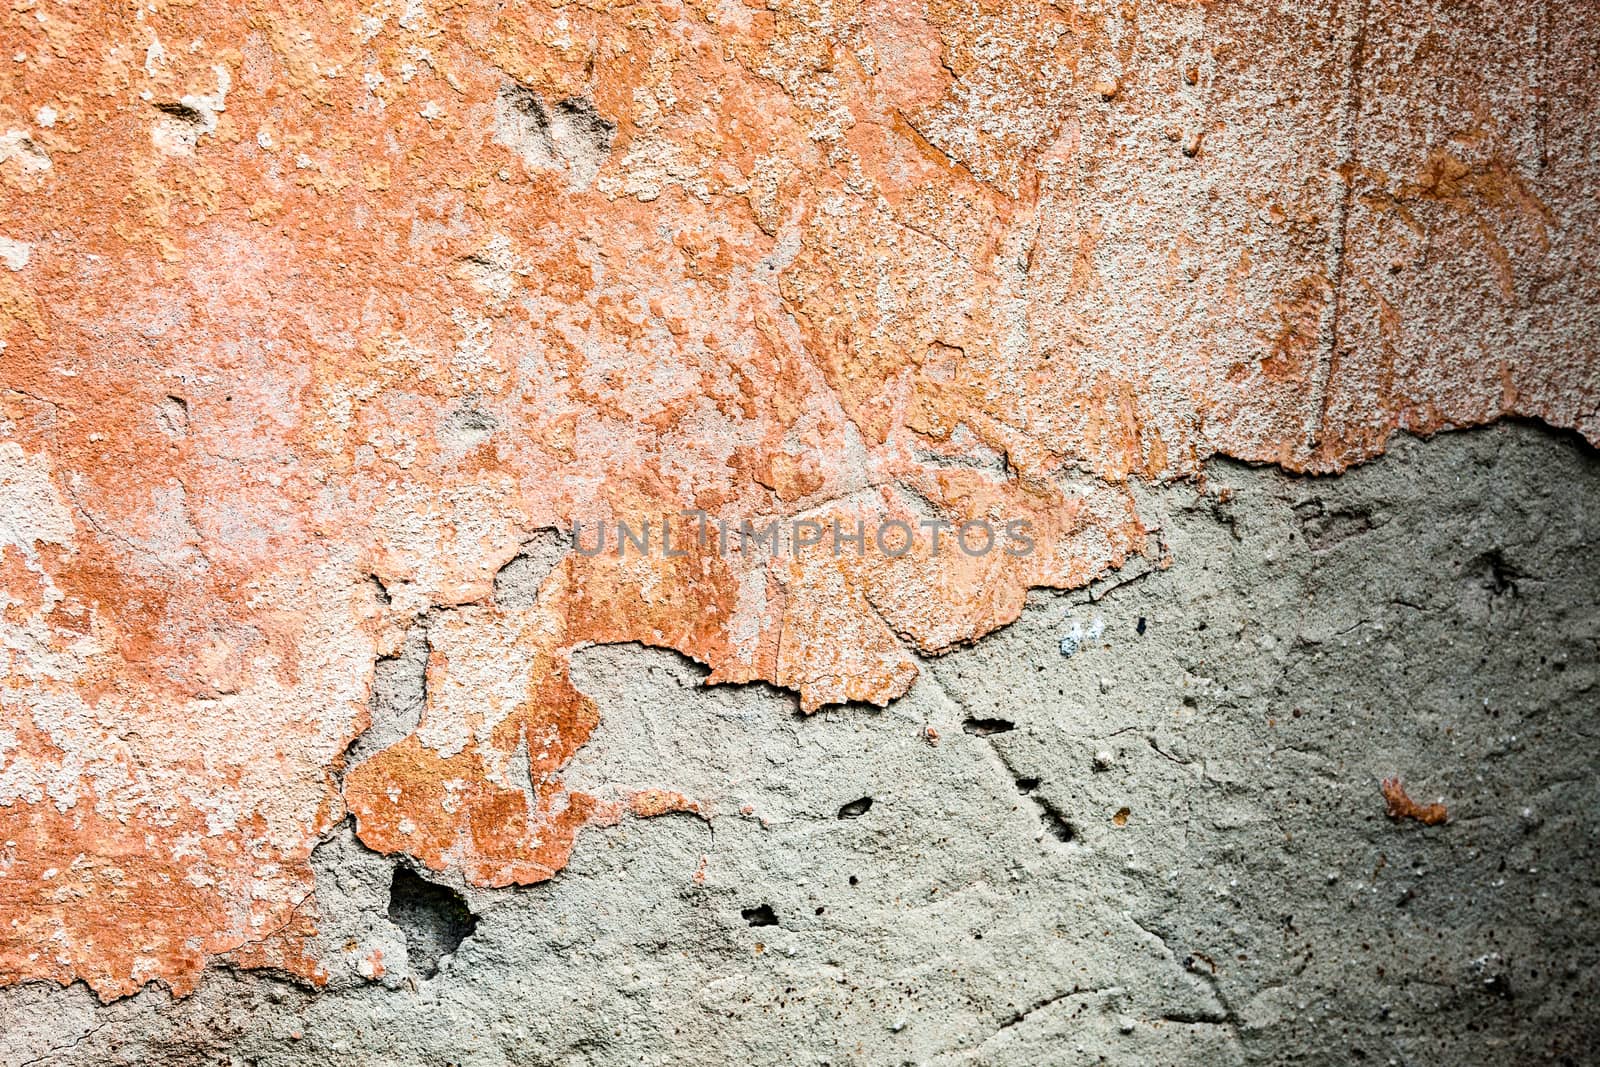 Concrete surface with the remains of orange paint and whitewash and partly fallen plaster.